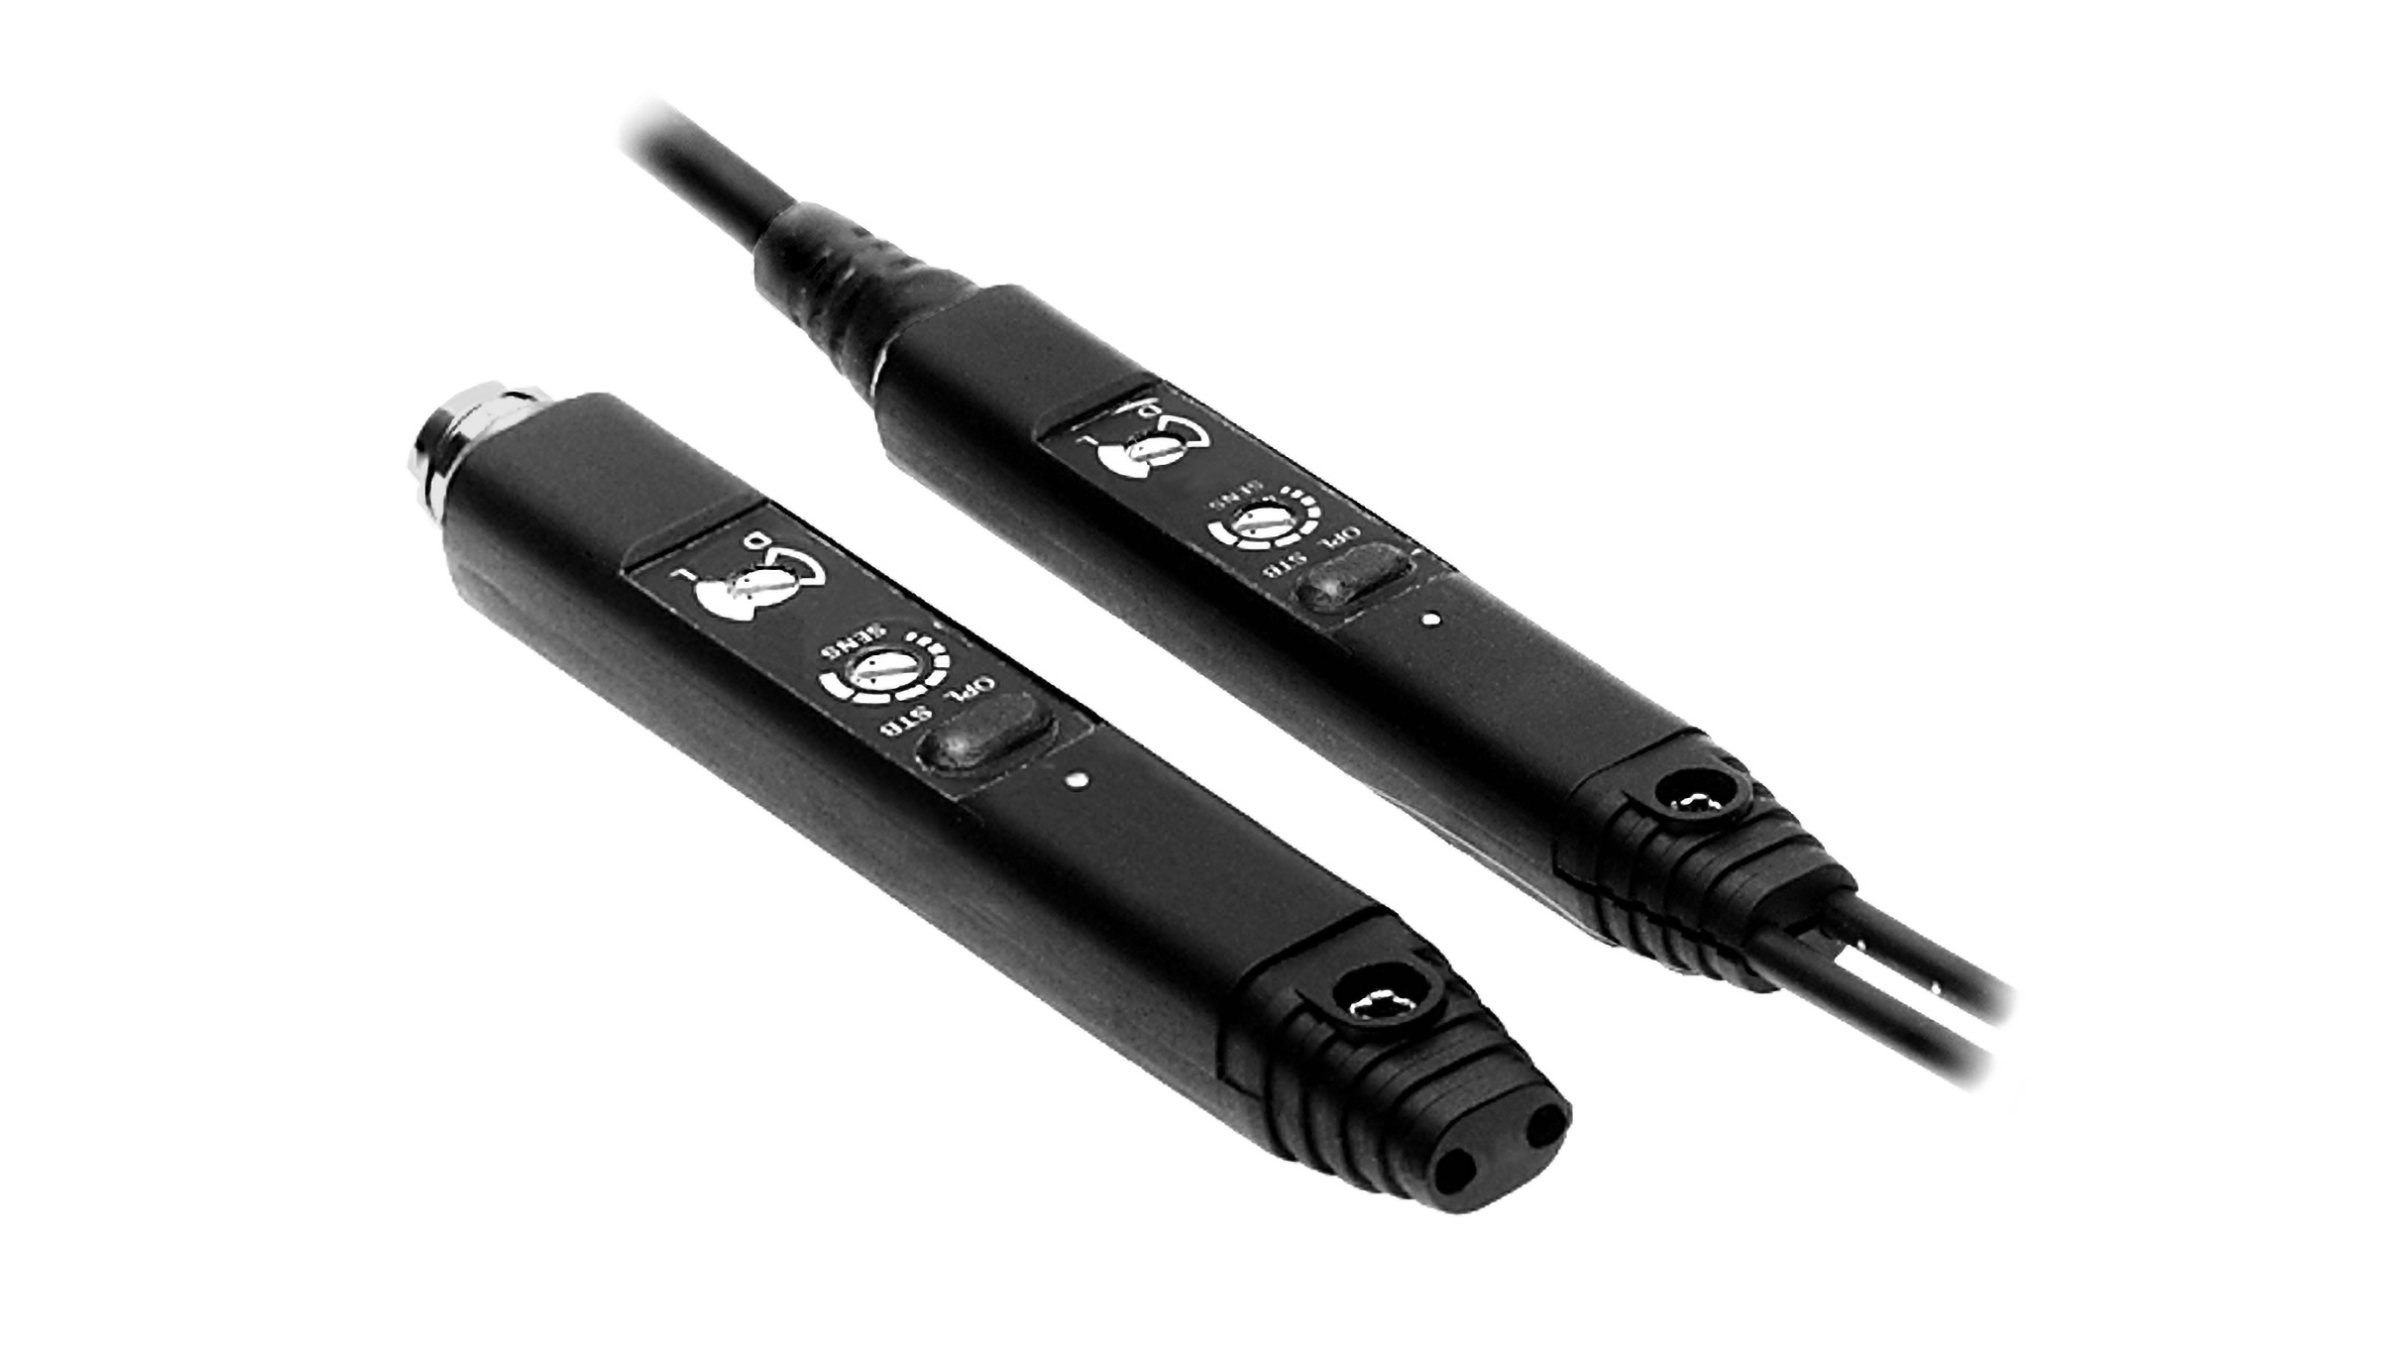 2 long and thin black, rectangular sensors, one with integrated cables